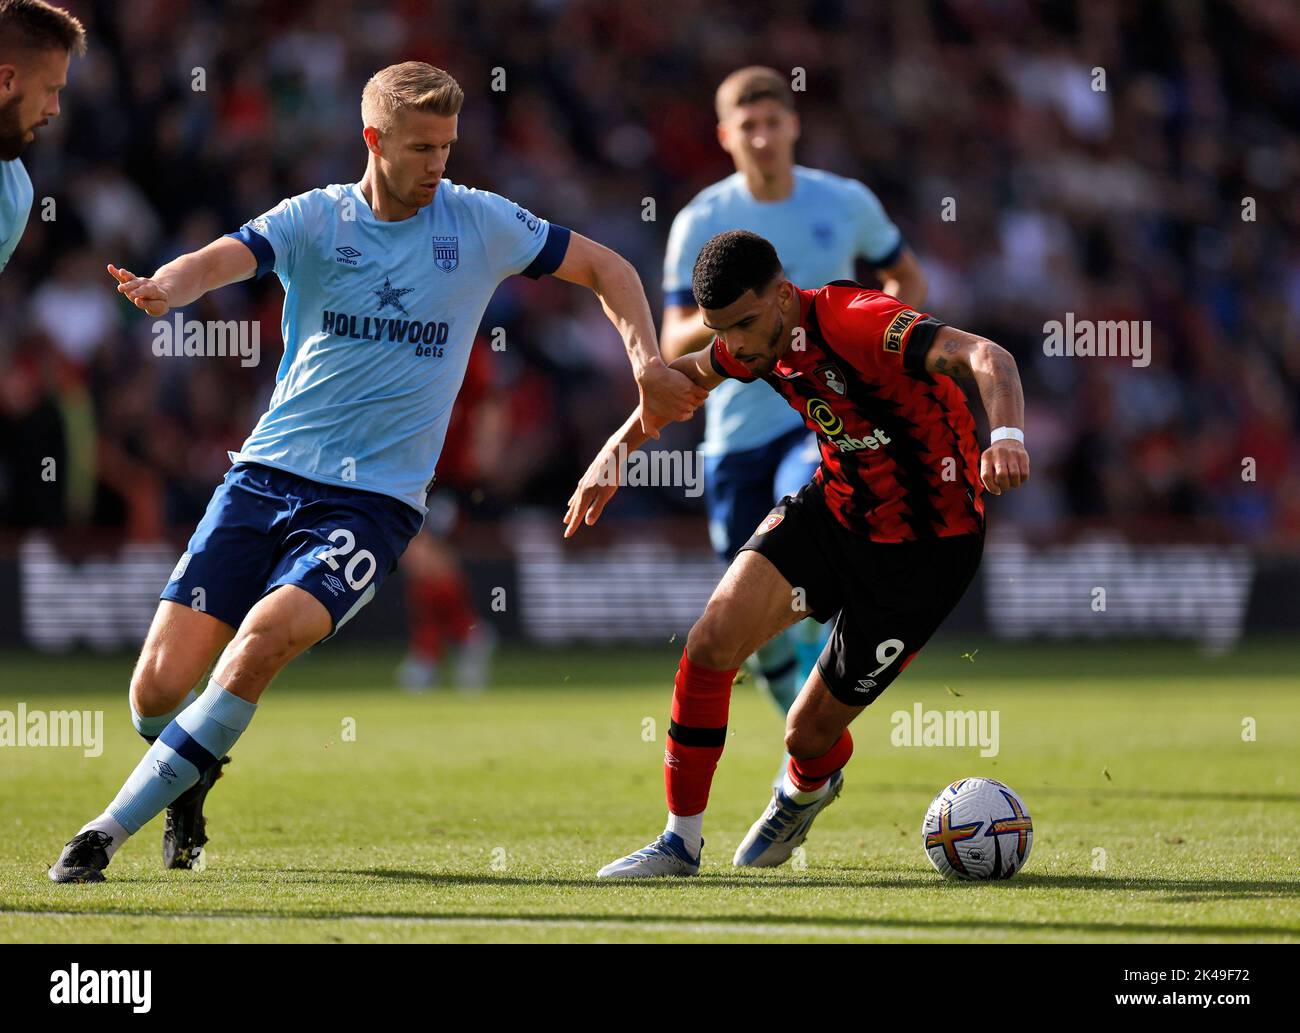 Brentford's Kristoffer Ajer (left) and Bournemouth's Dominic Solanke battle for the ball during the Premier League match at the Vitality Stadium, Bournemouth. Picture date: Saturday October 1, 2022. Stock Photo